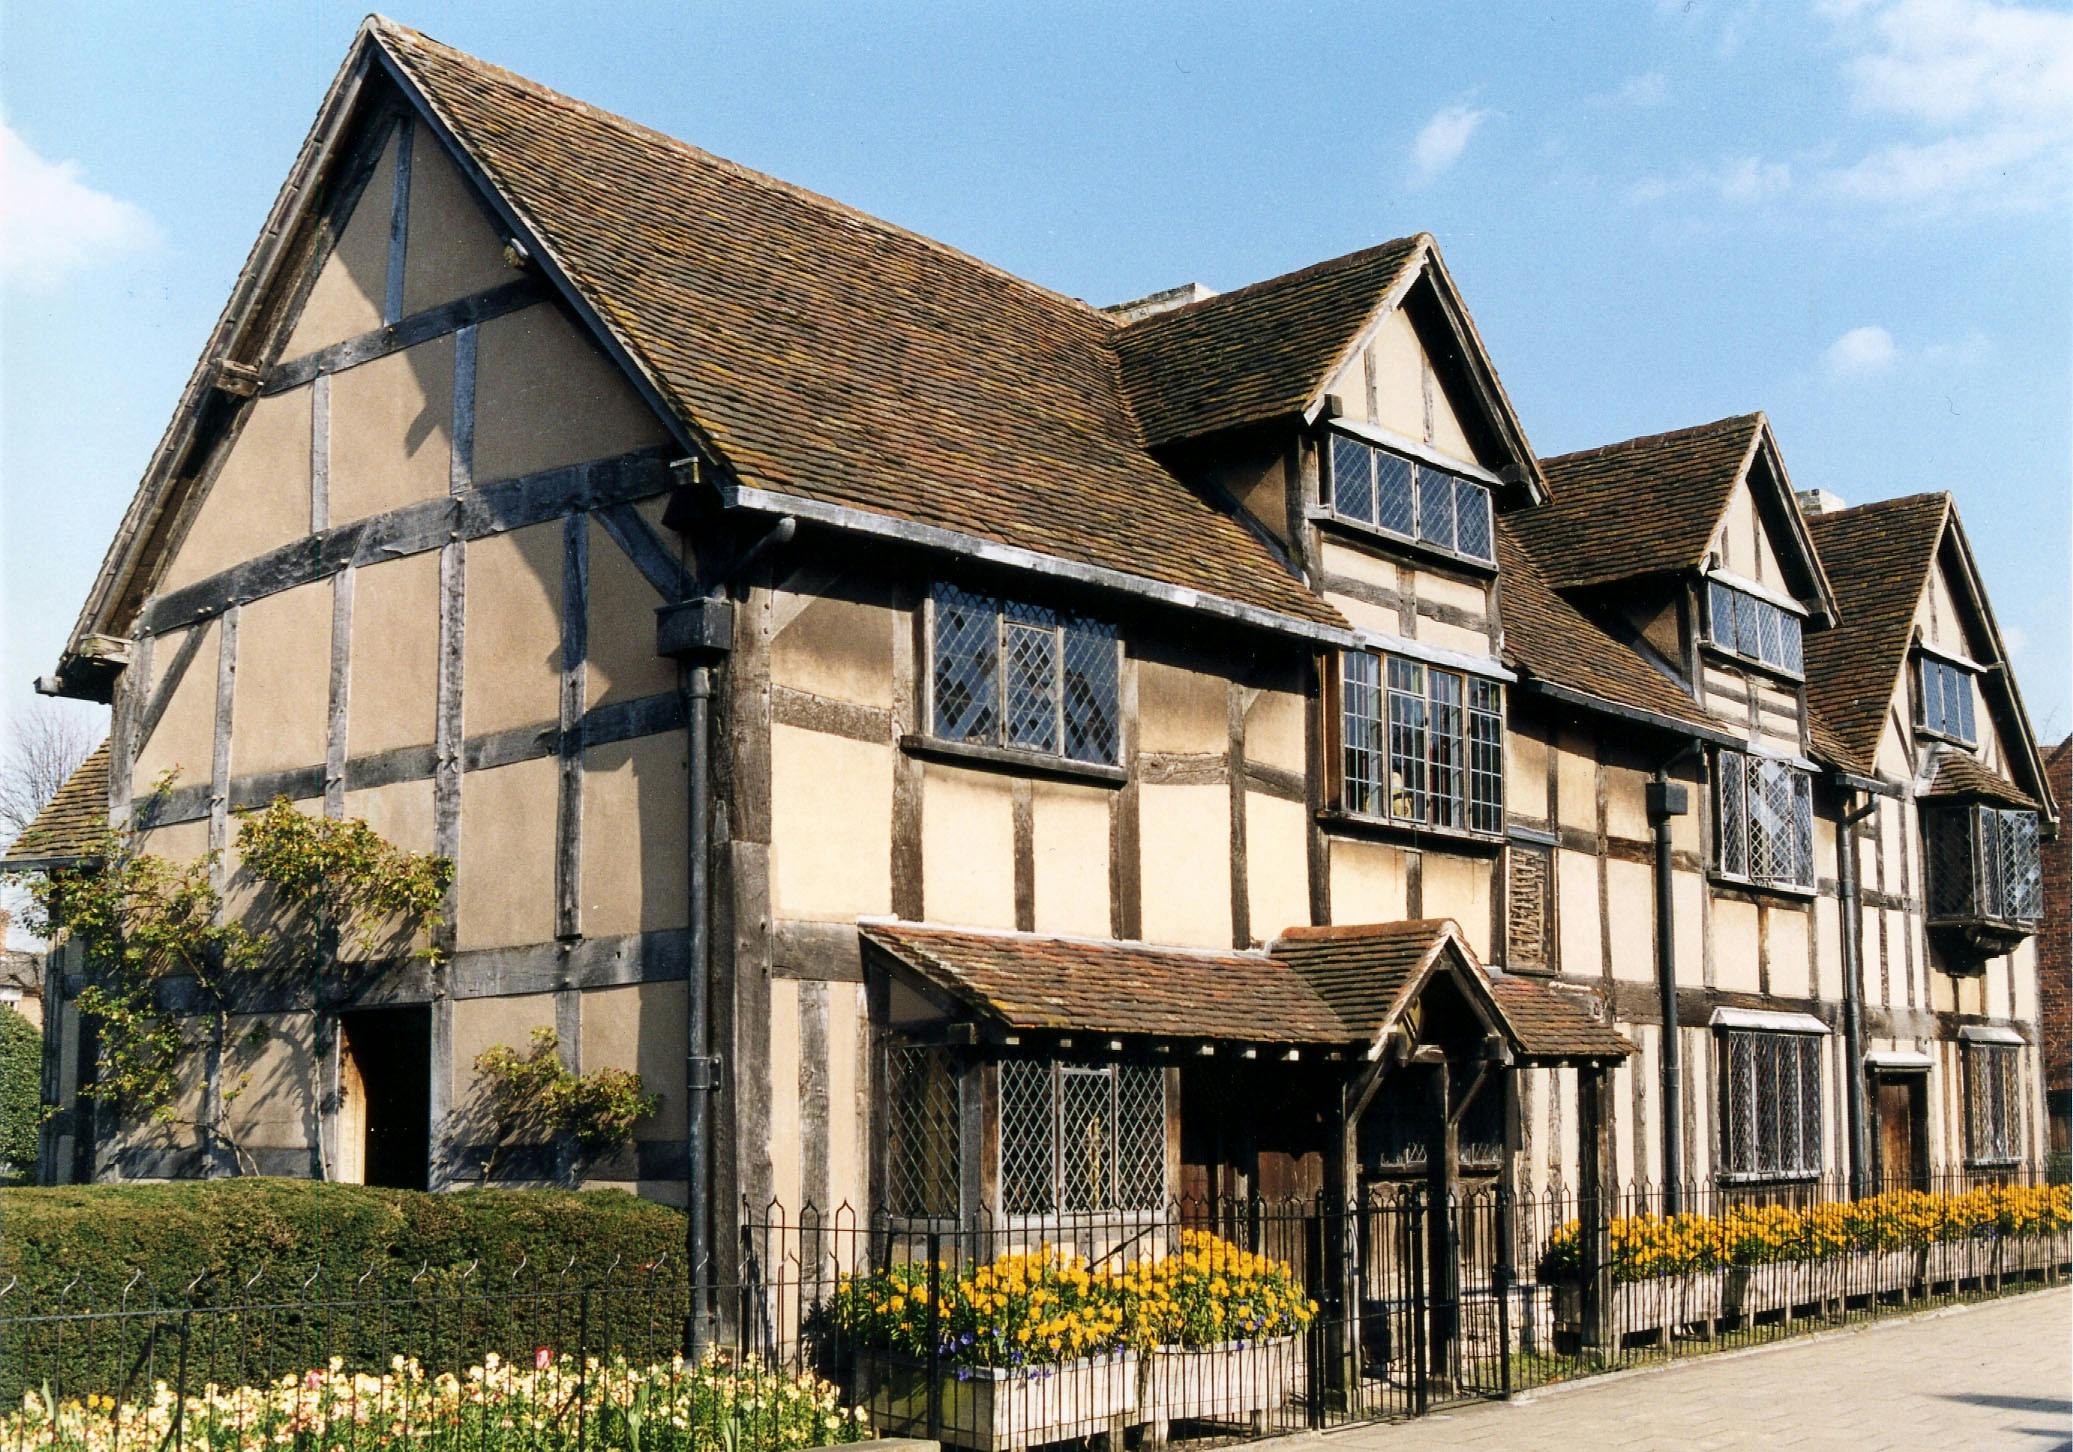 shakespeare's birthplace front.JPG